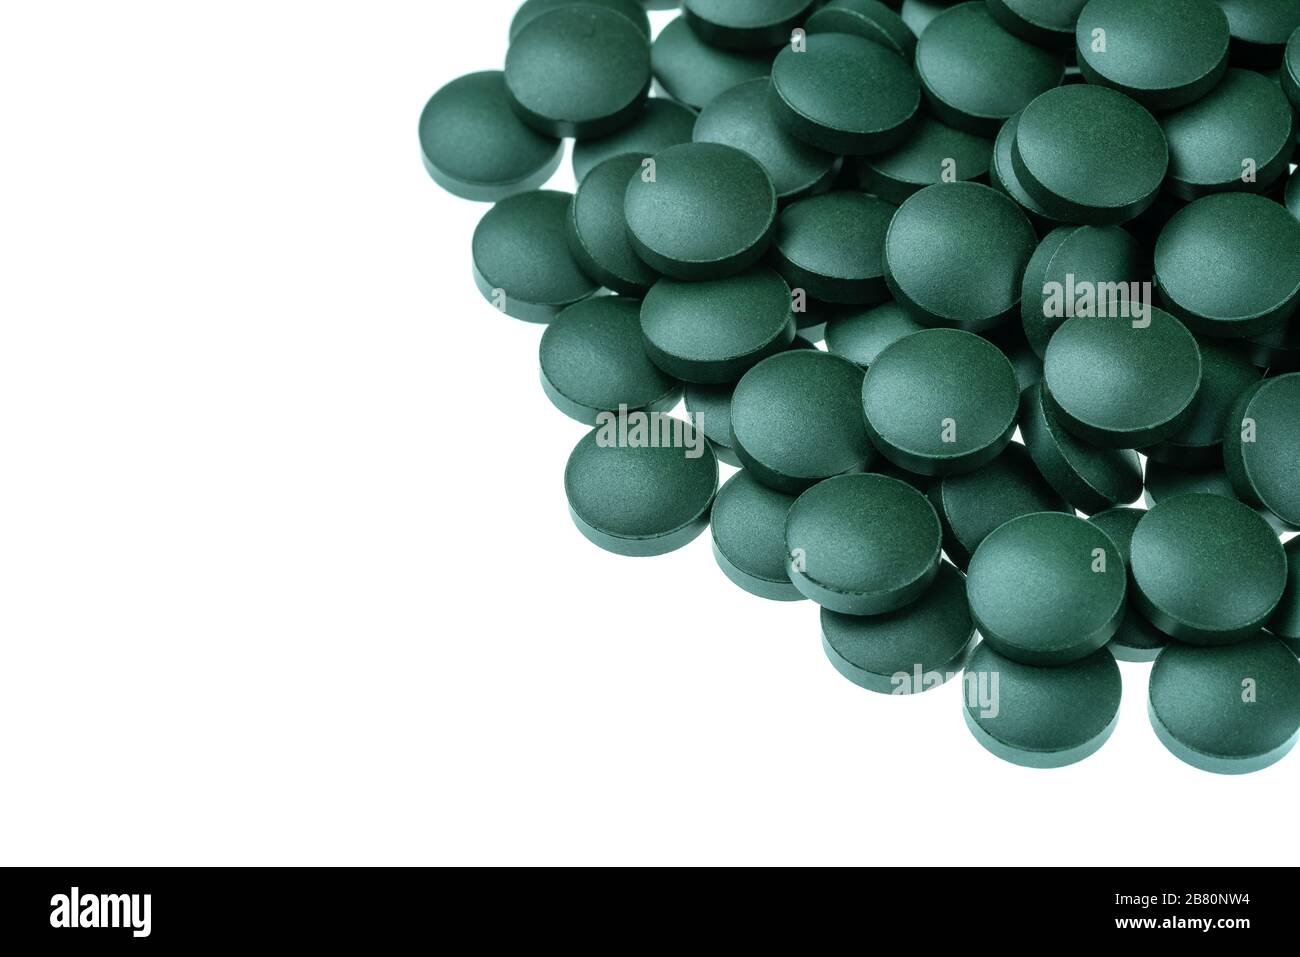 Vitamin and mineral supplements for vegetarians spirulina in tablets on a white background, close-up Stock Photo